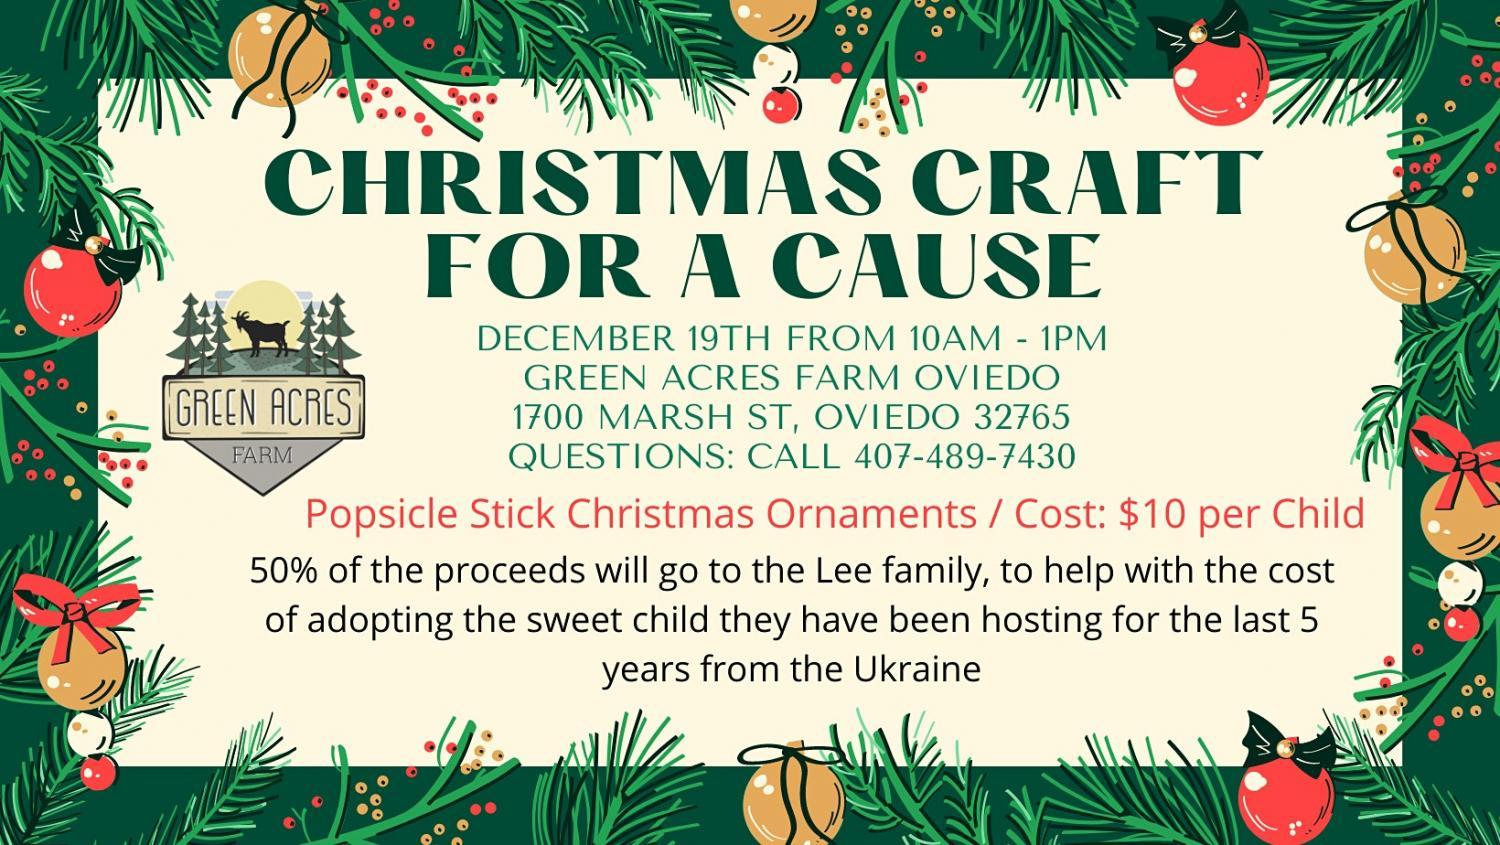 Christmas Craft for a Cause